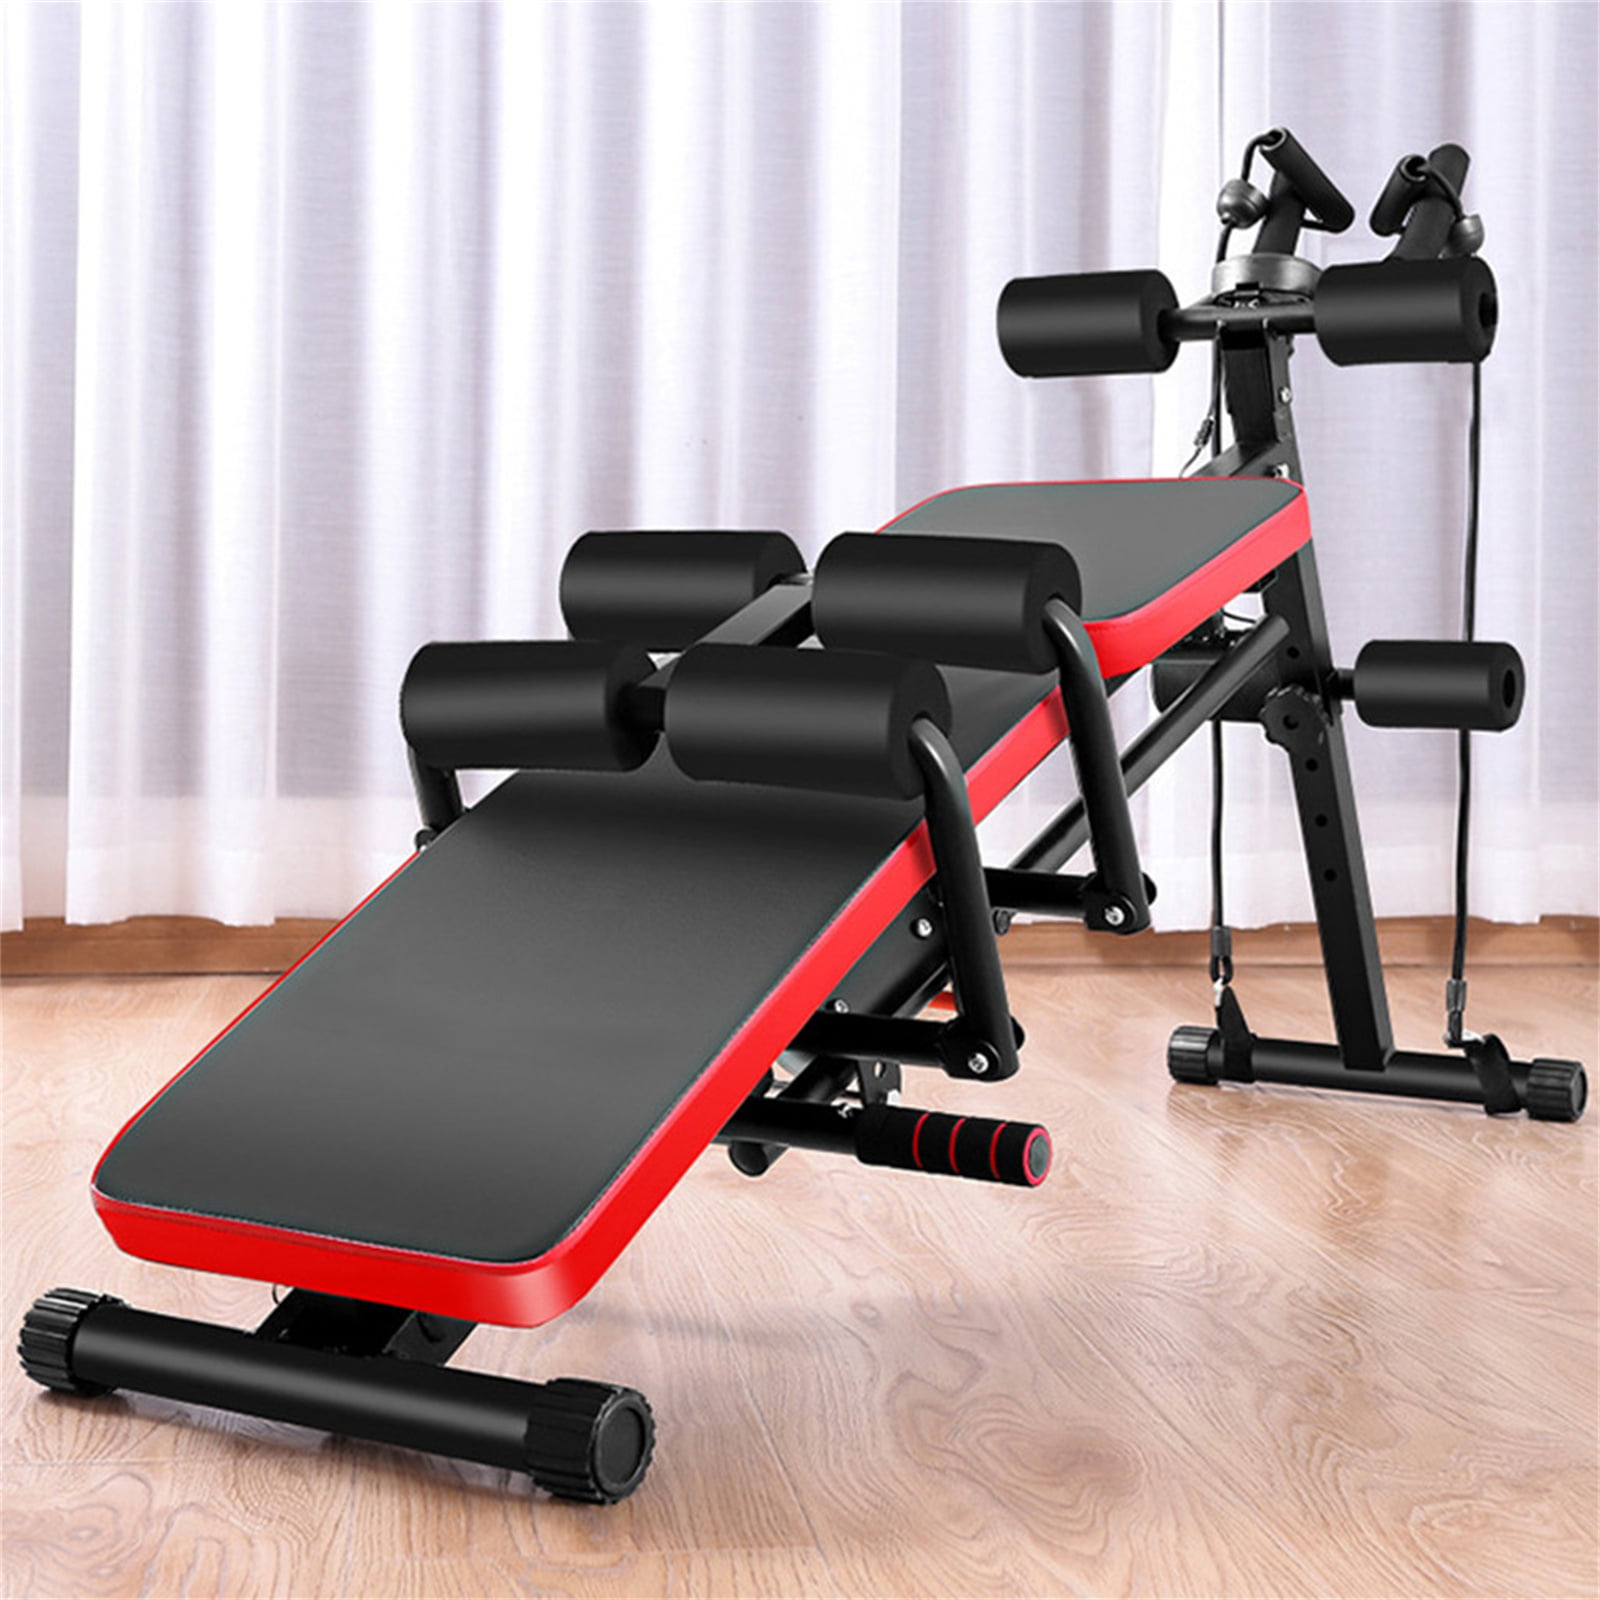 Adjustable Decline Sit up Bench Crunch Board Durable Fitness Home Gym Exercise ! 